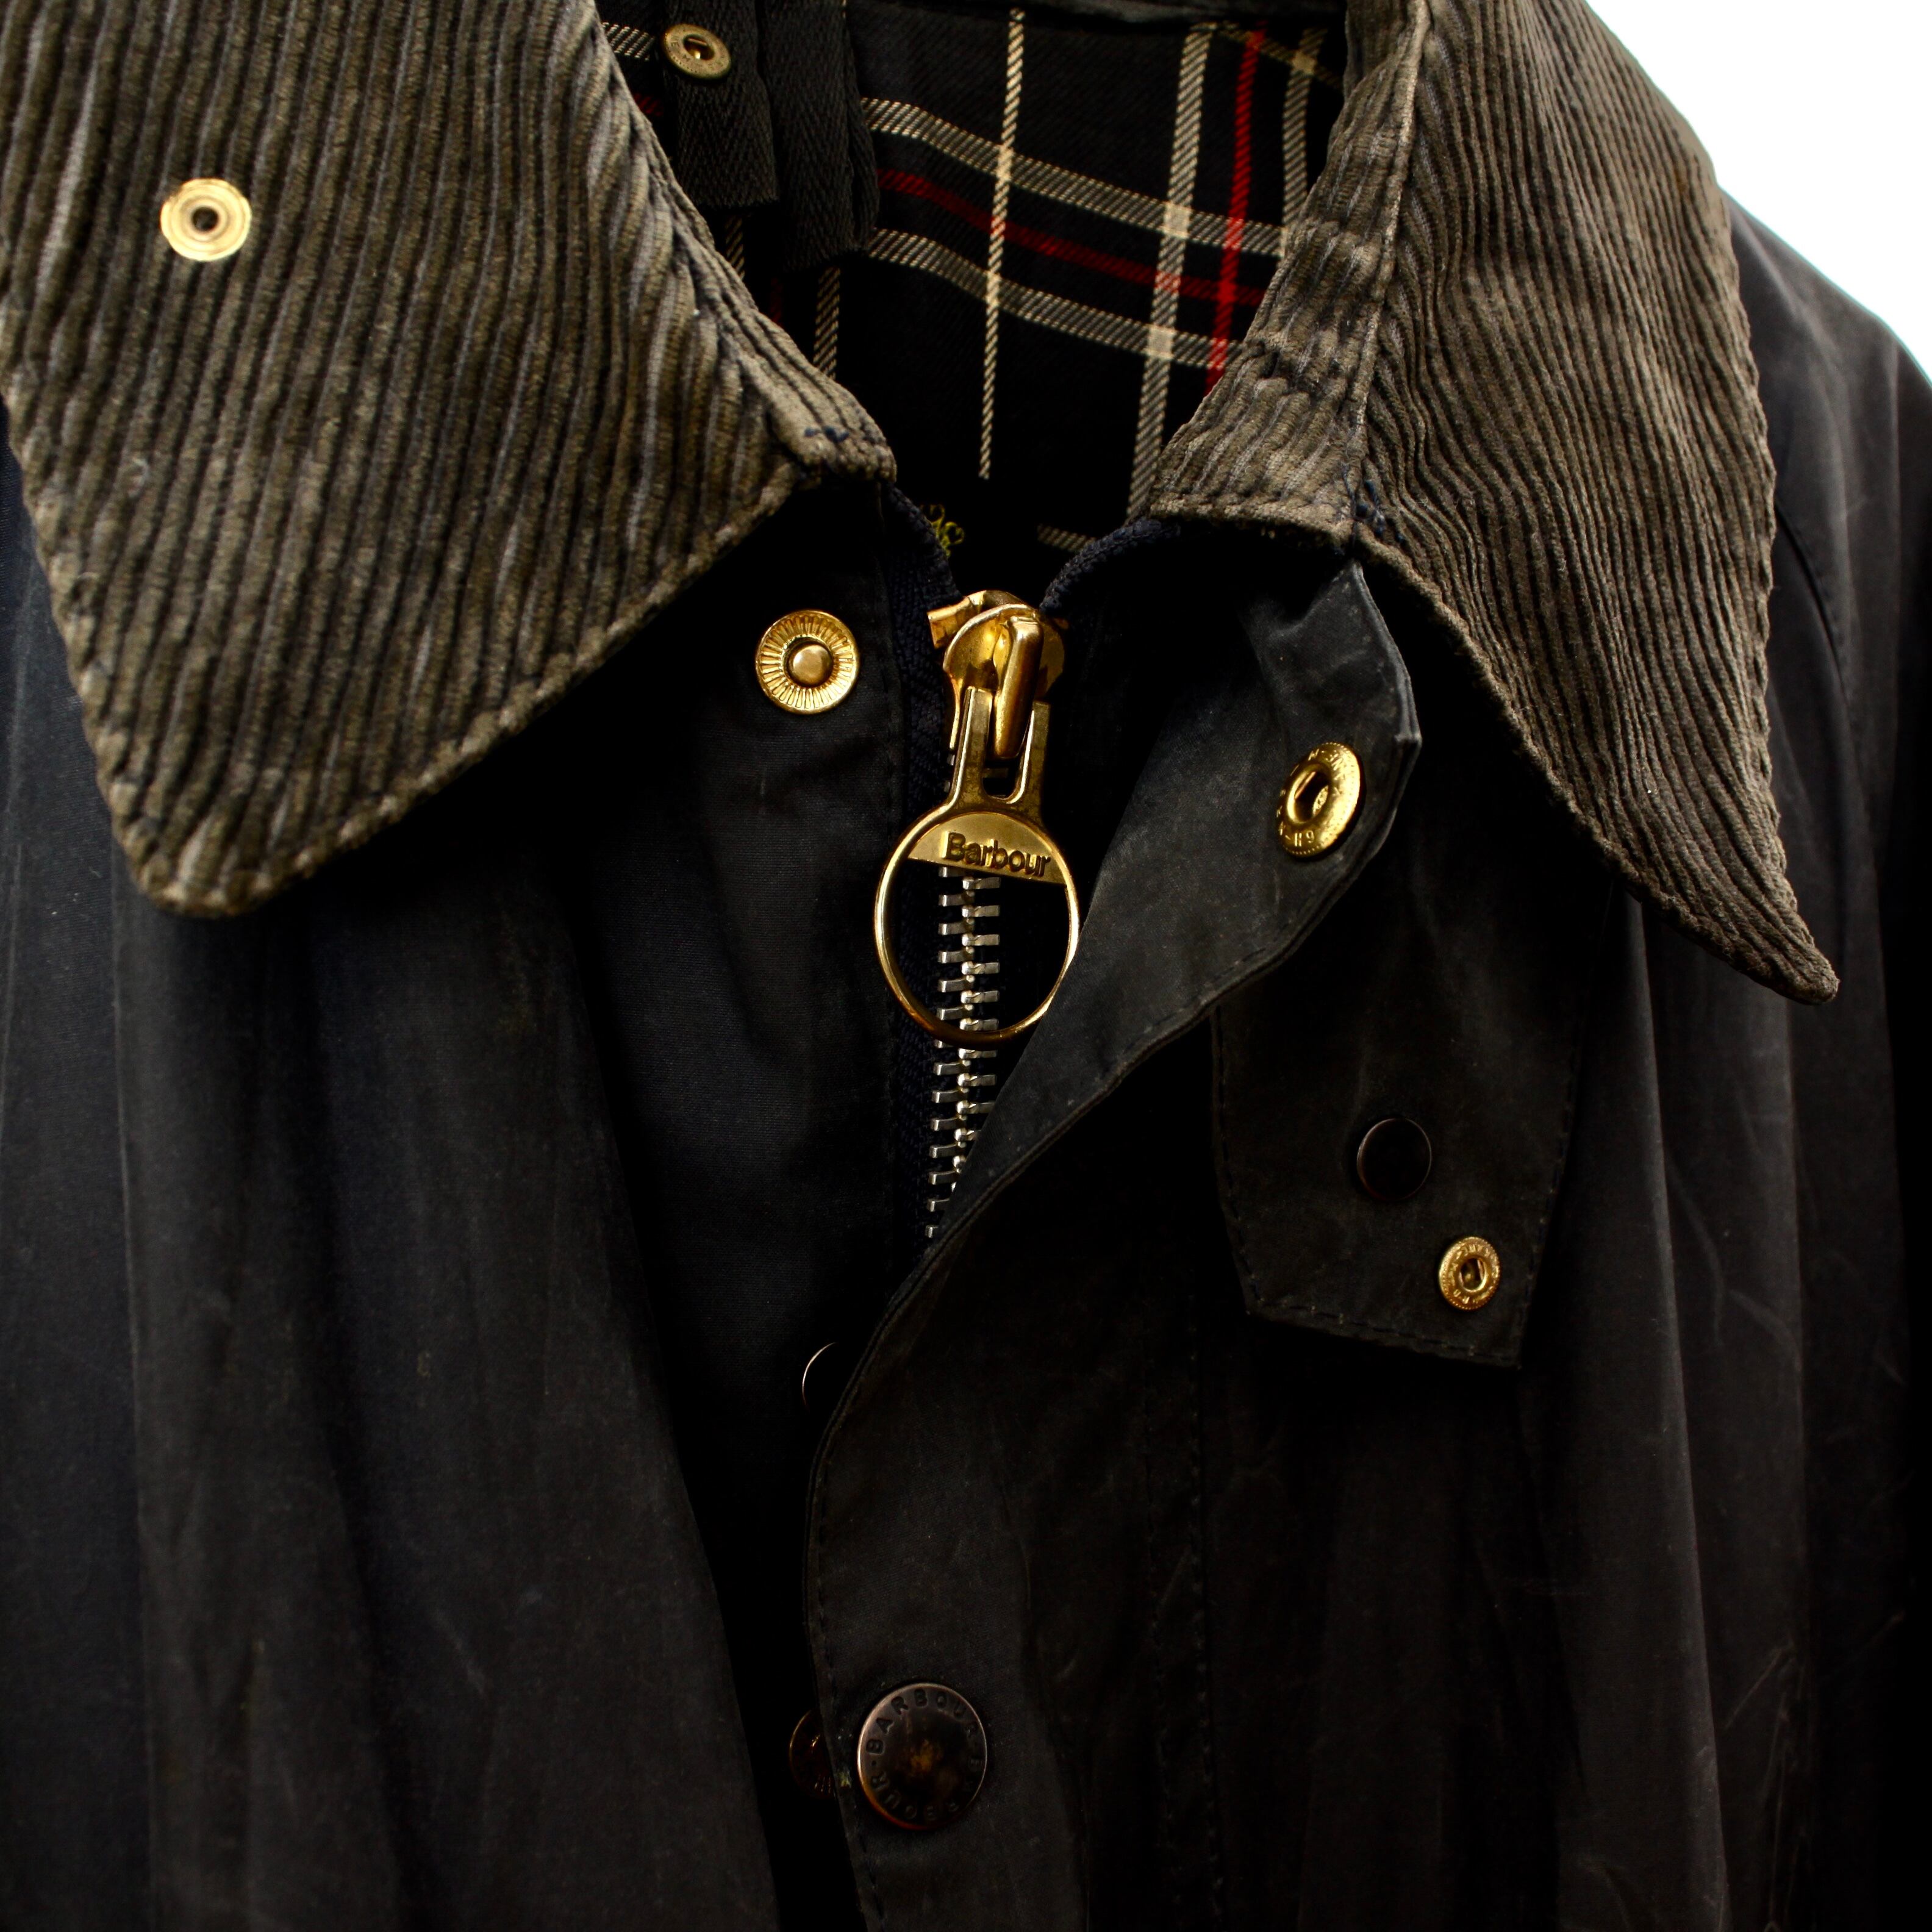 0113. 1990's barbour bedale oiled jacket ネイビー オイルド